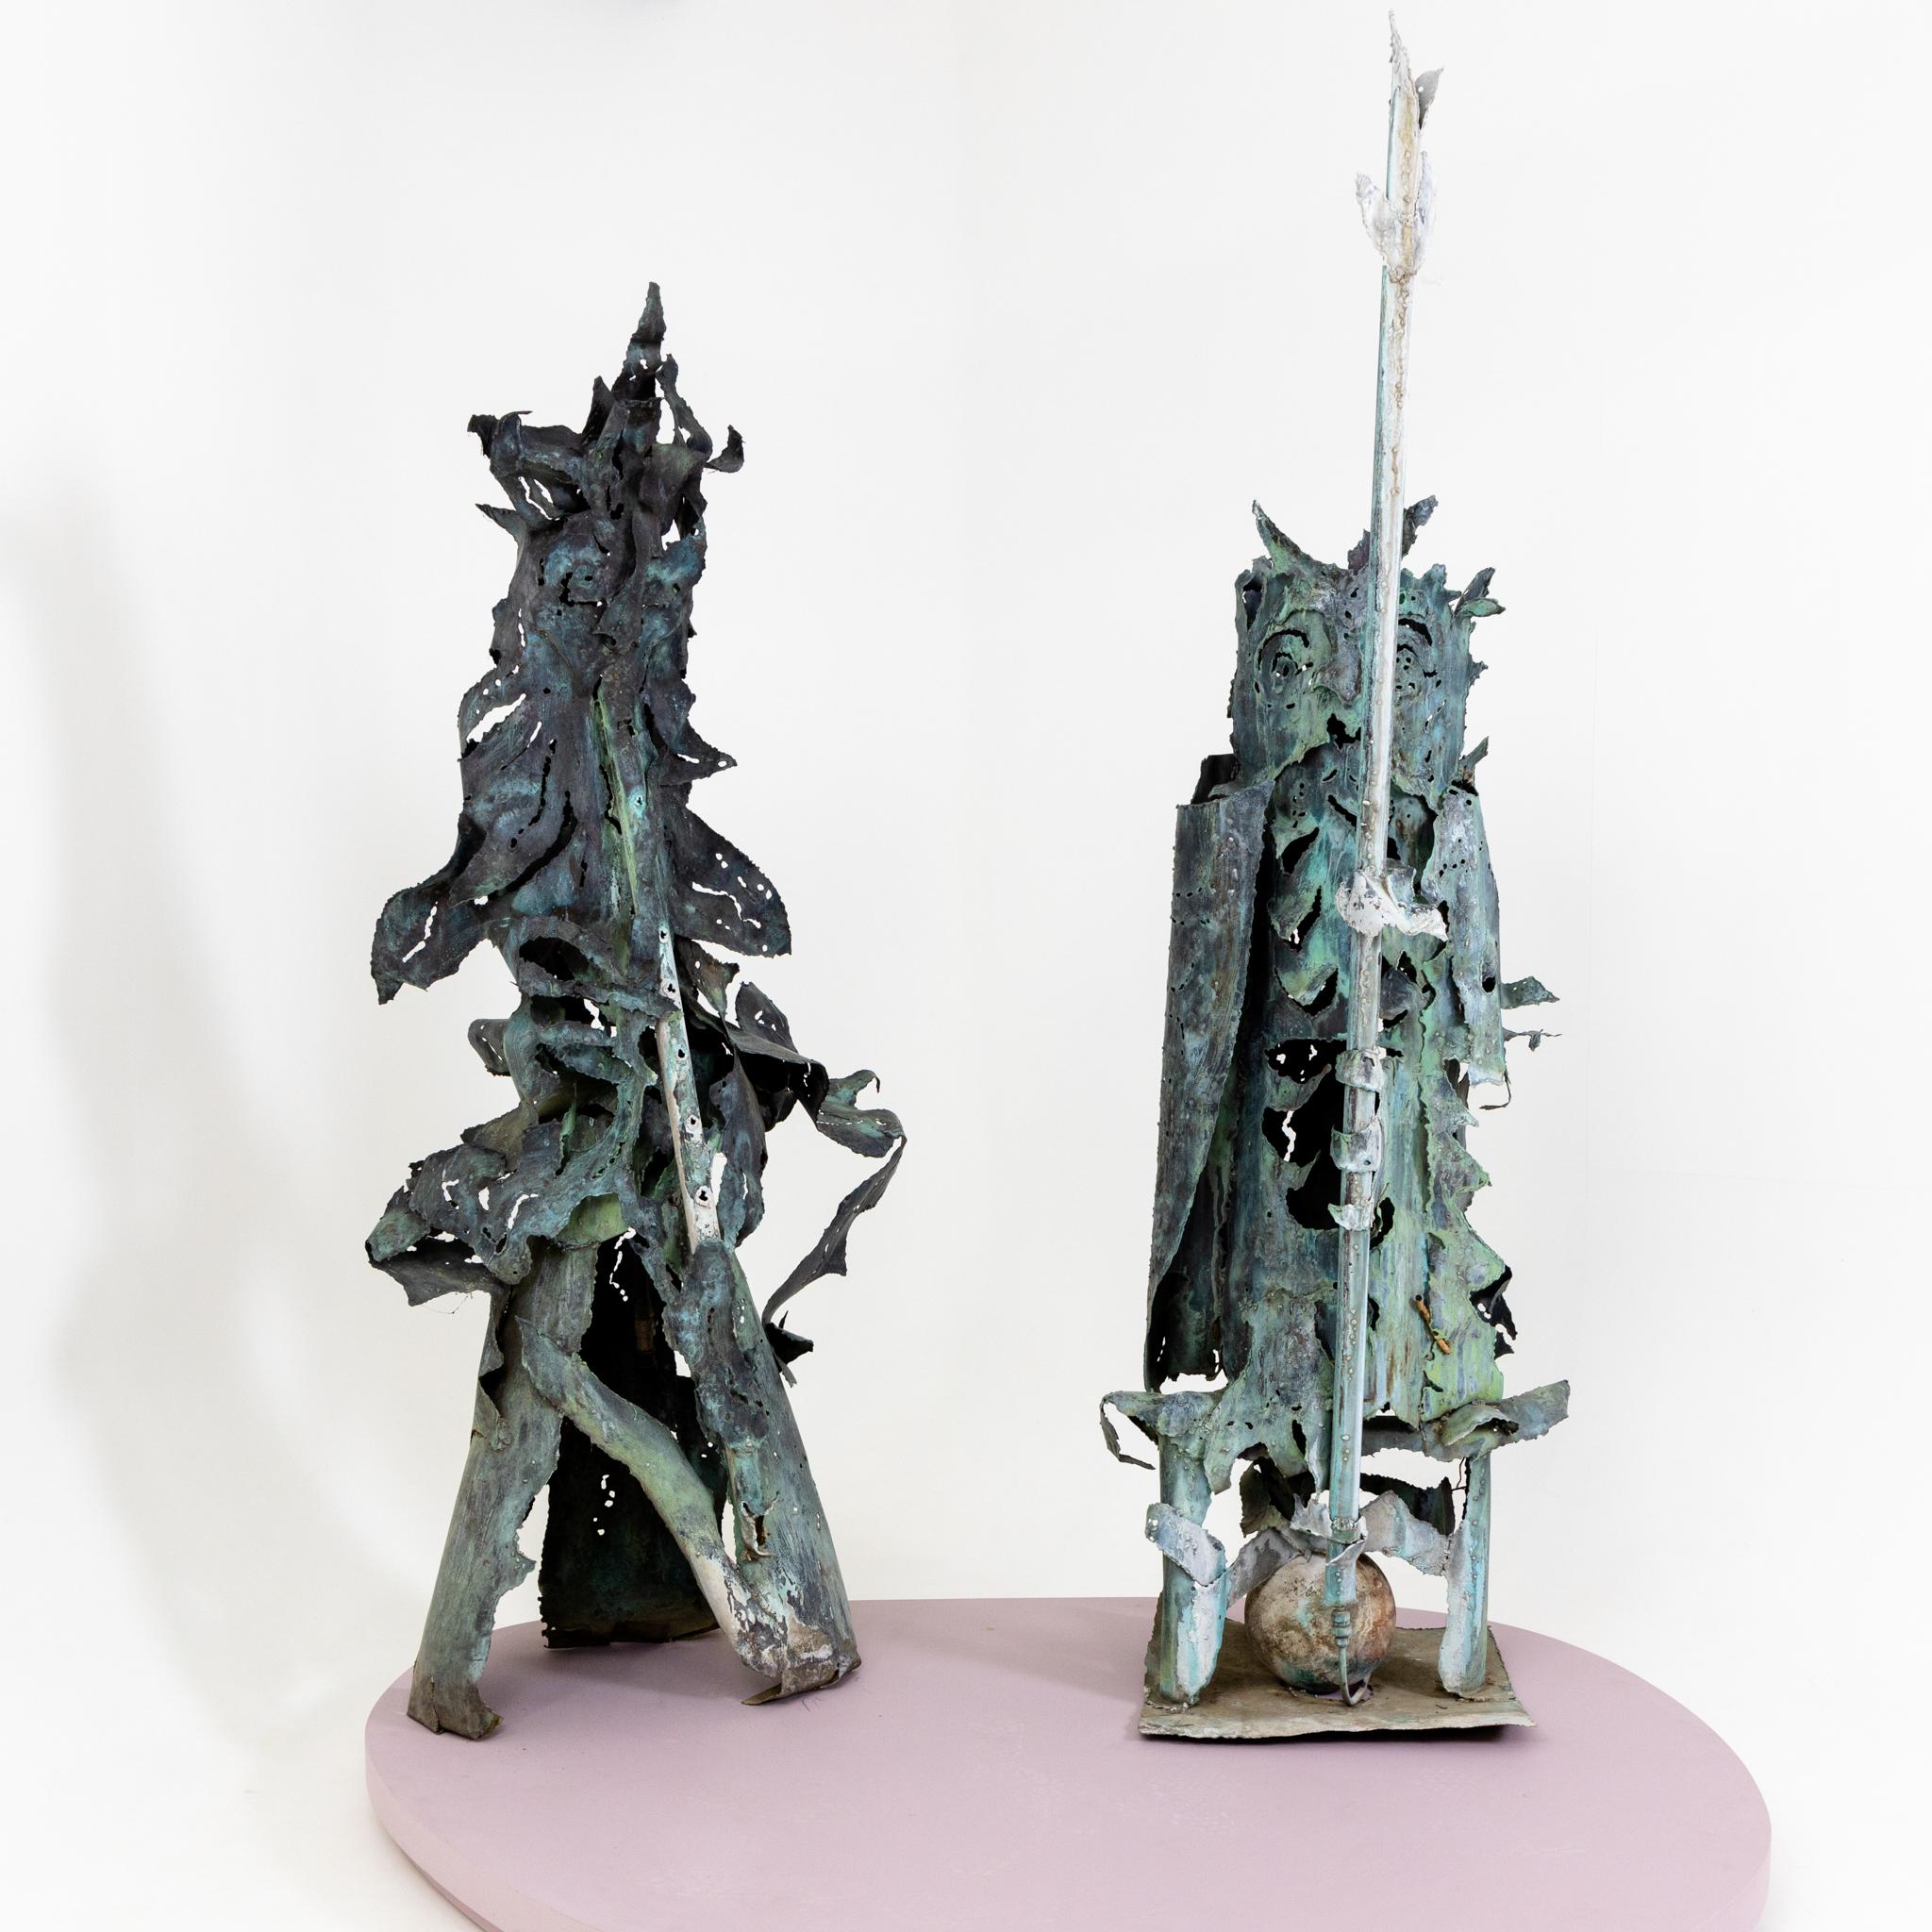 Pair of gargoyles in fanciful design and decorative patina. Dimensions owl: 235 x 75 x 80 cm, flute player: 196.5 x 80 x 73 cm.